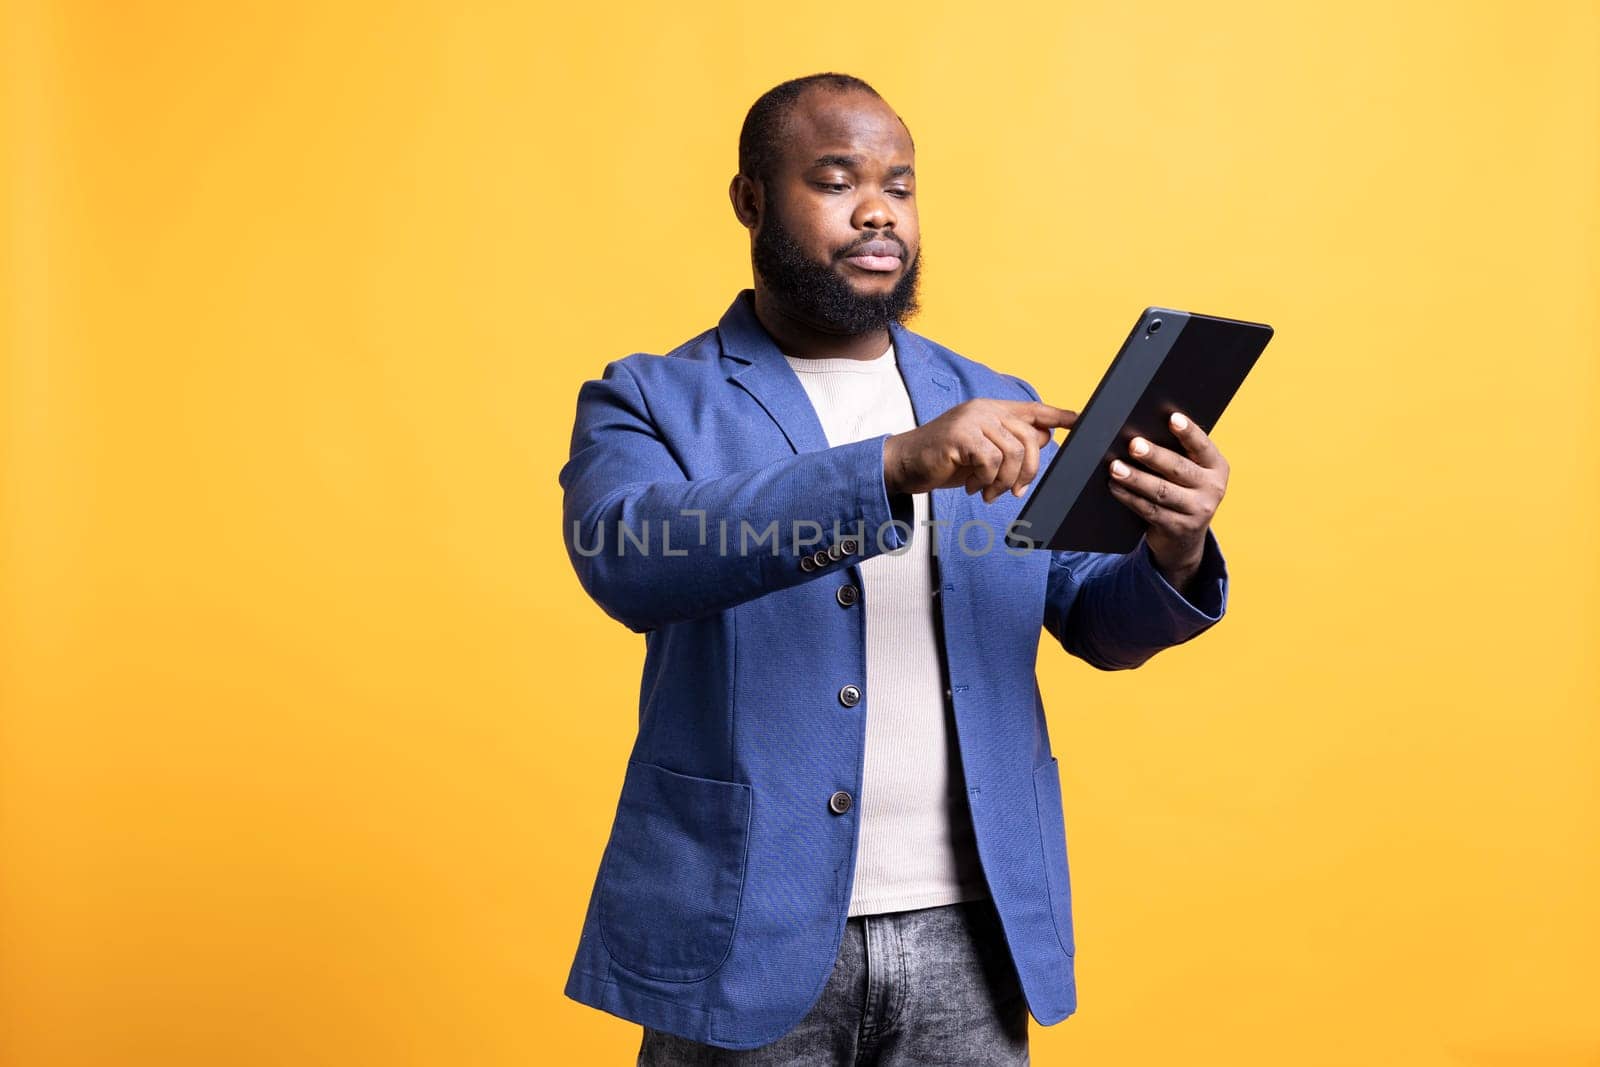 Bored person mindlessly scrolling on tablet screen, isolated over studio background. African american man passing time on social media on portable device, enjoying leisure time